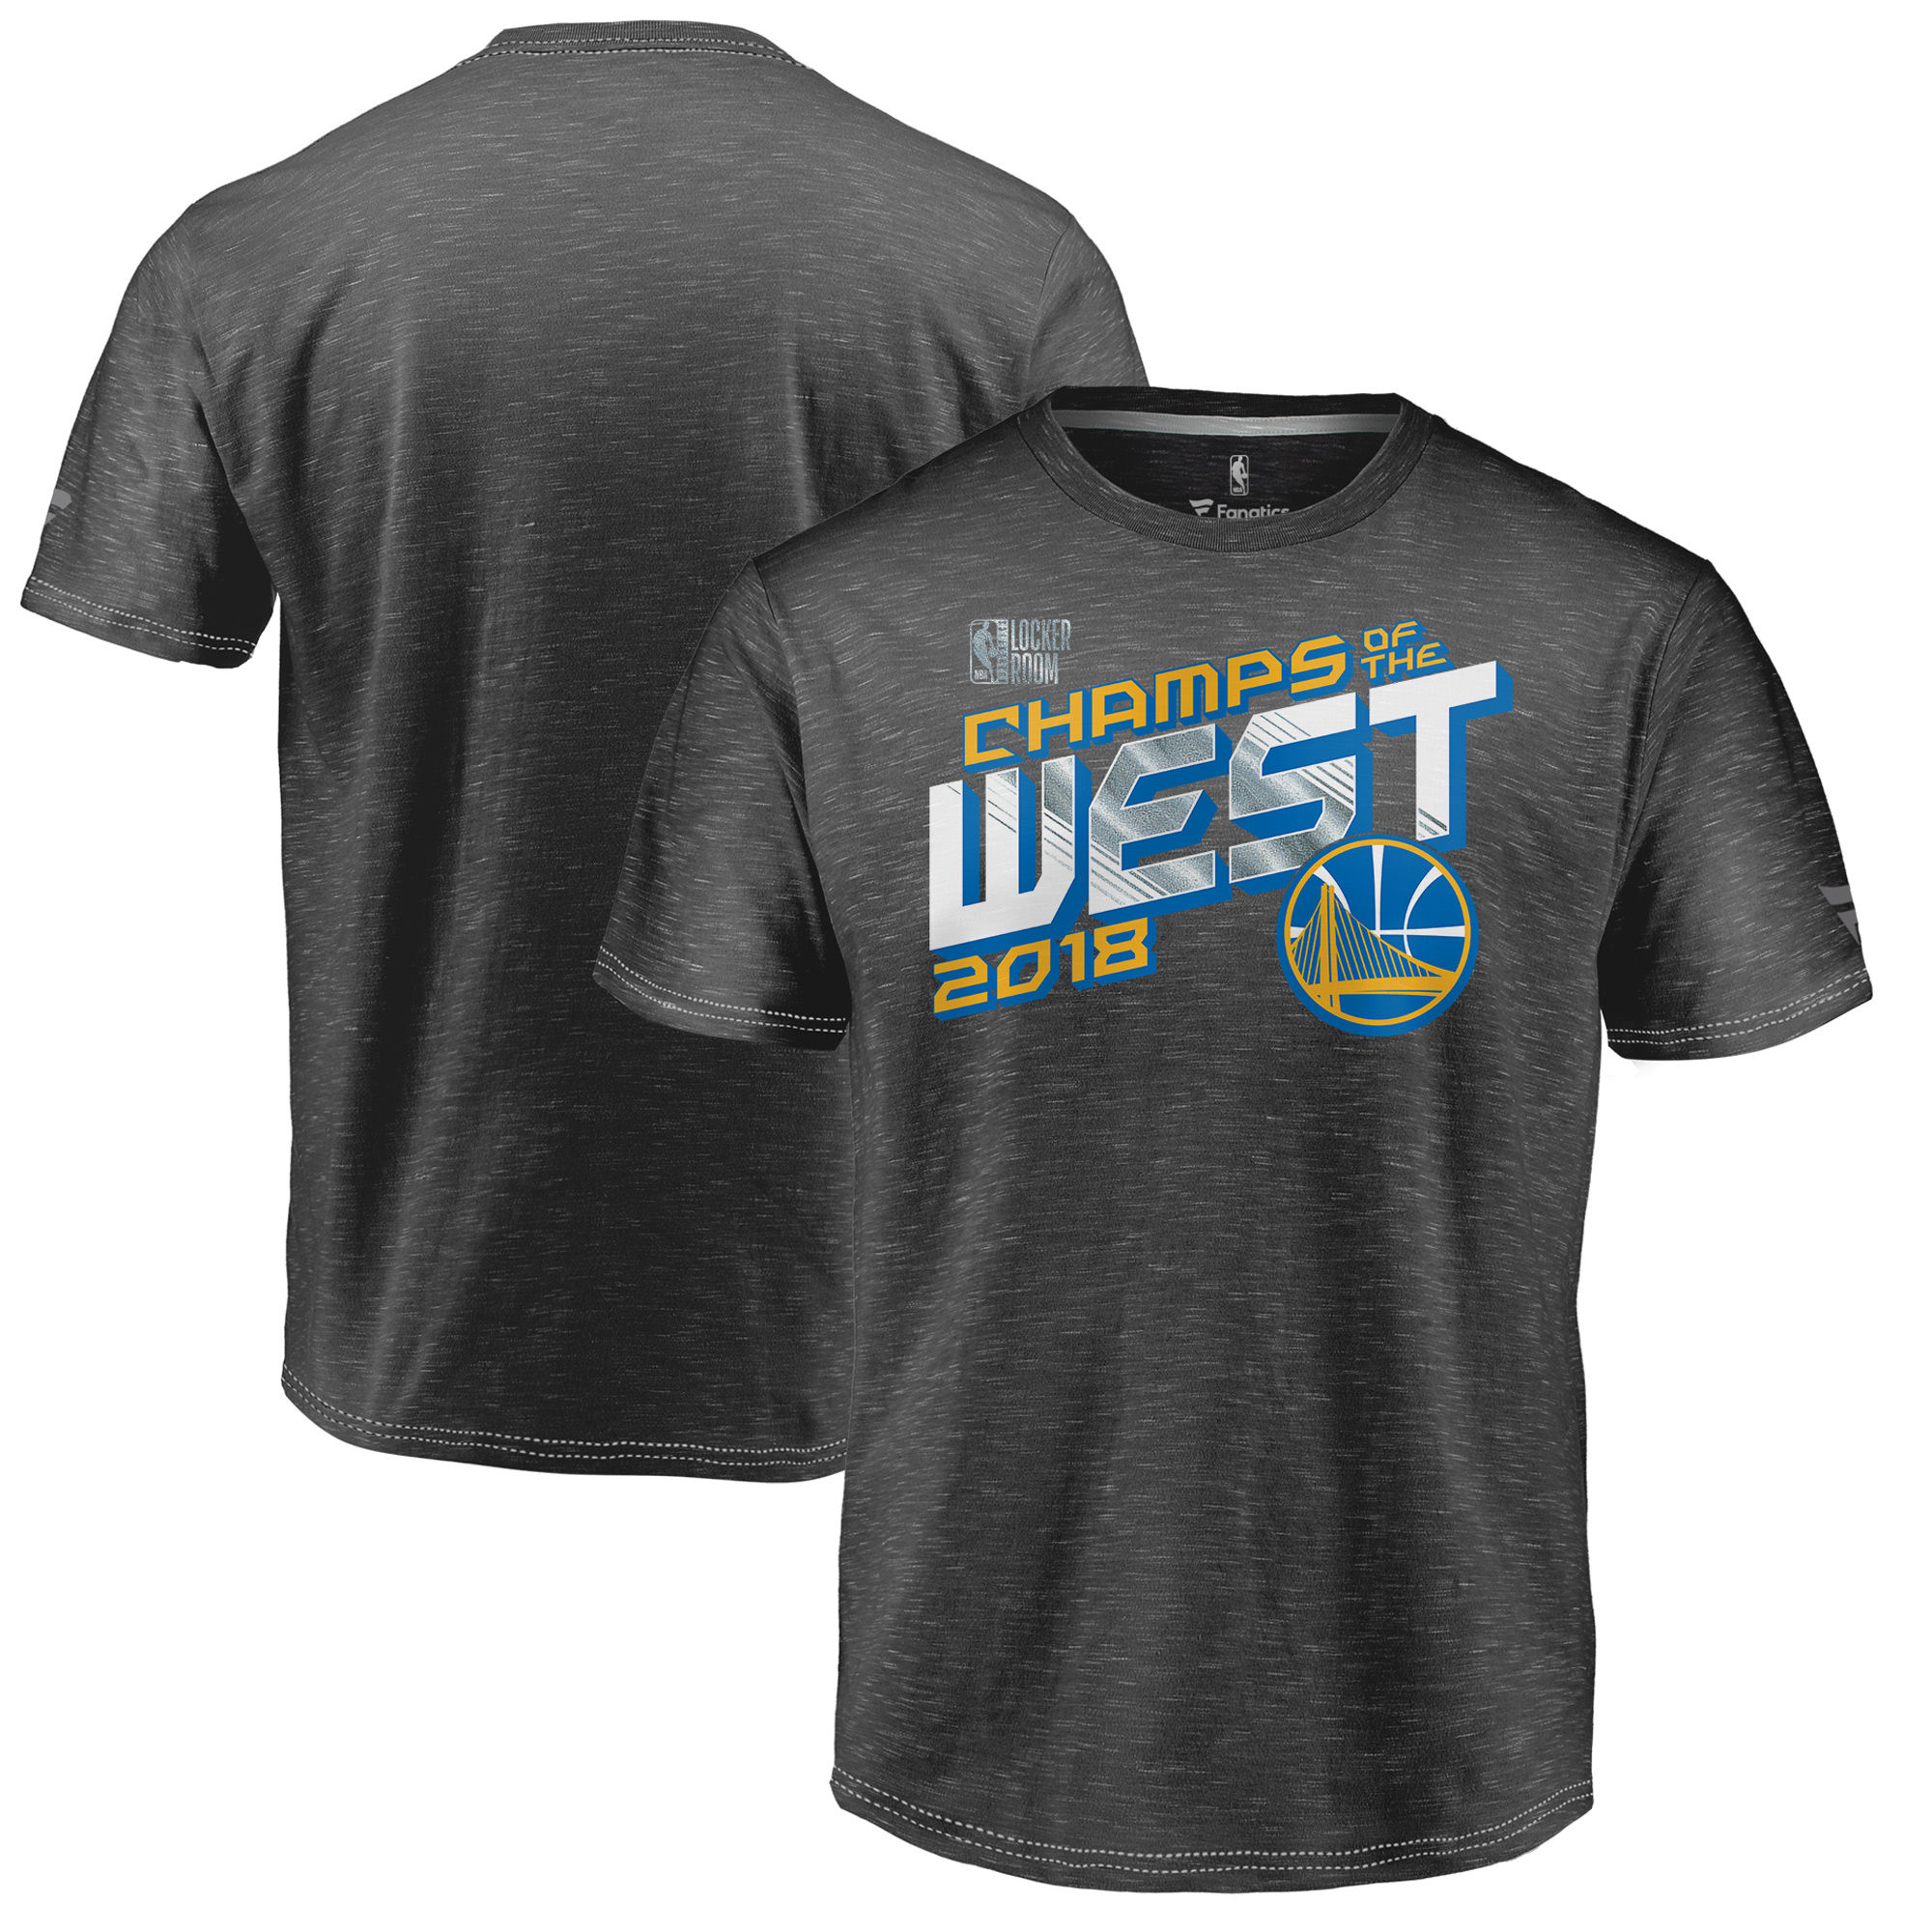 Golden State Warriors Fanatics Branded 2018 Western Conference Champions Locker Room T-Shirt Heather Charcoal